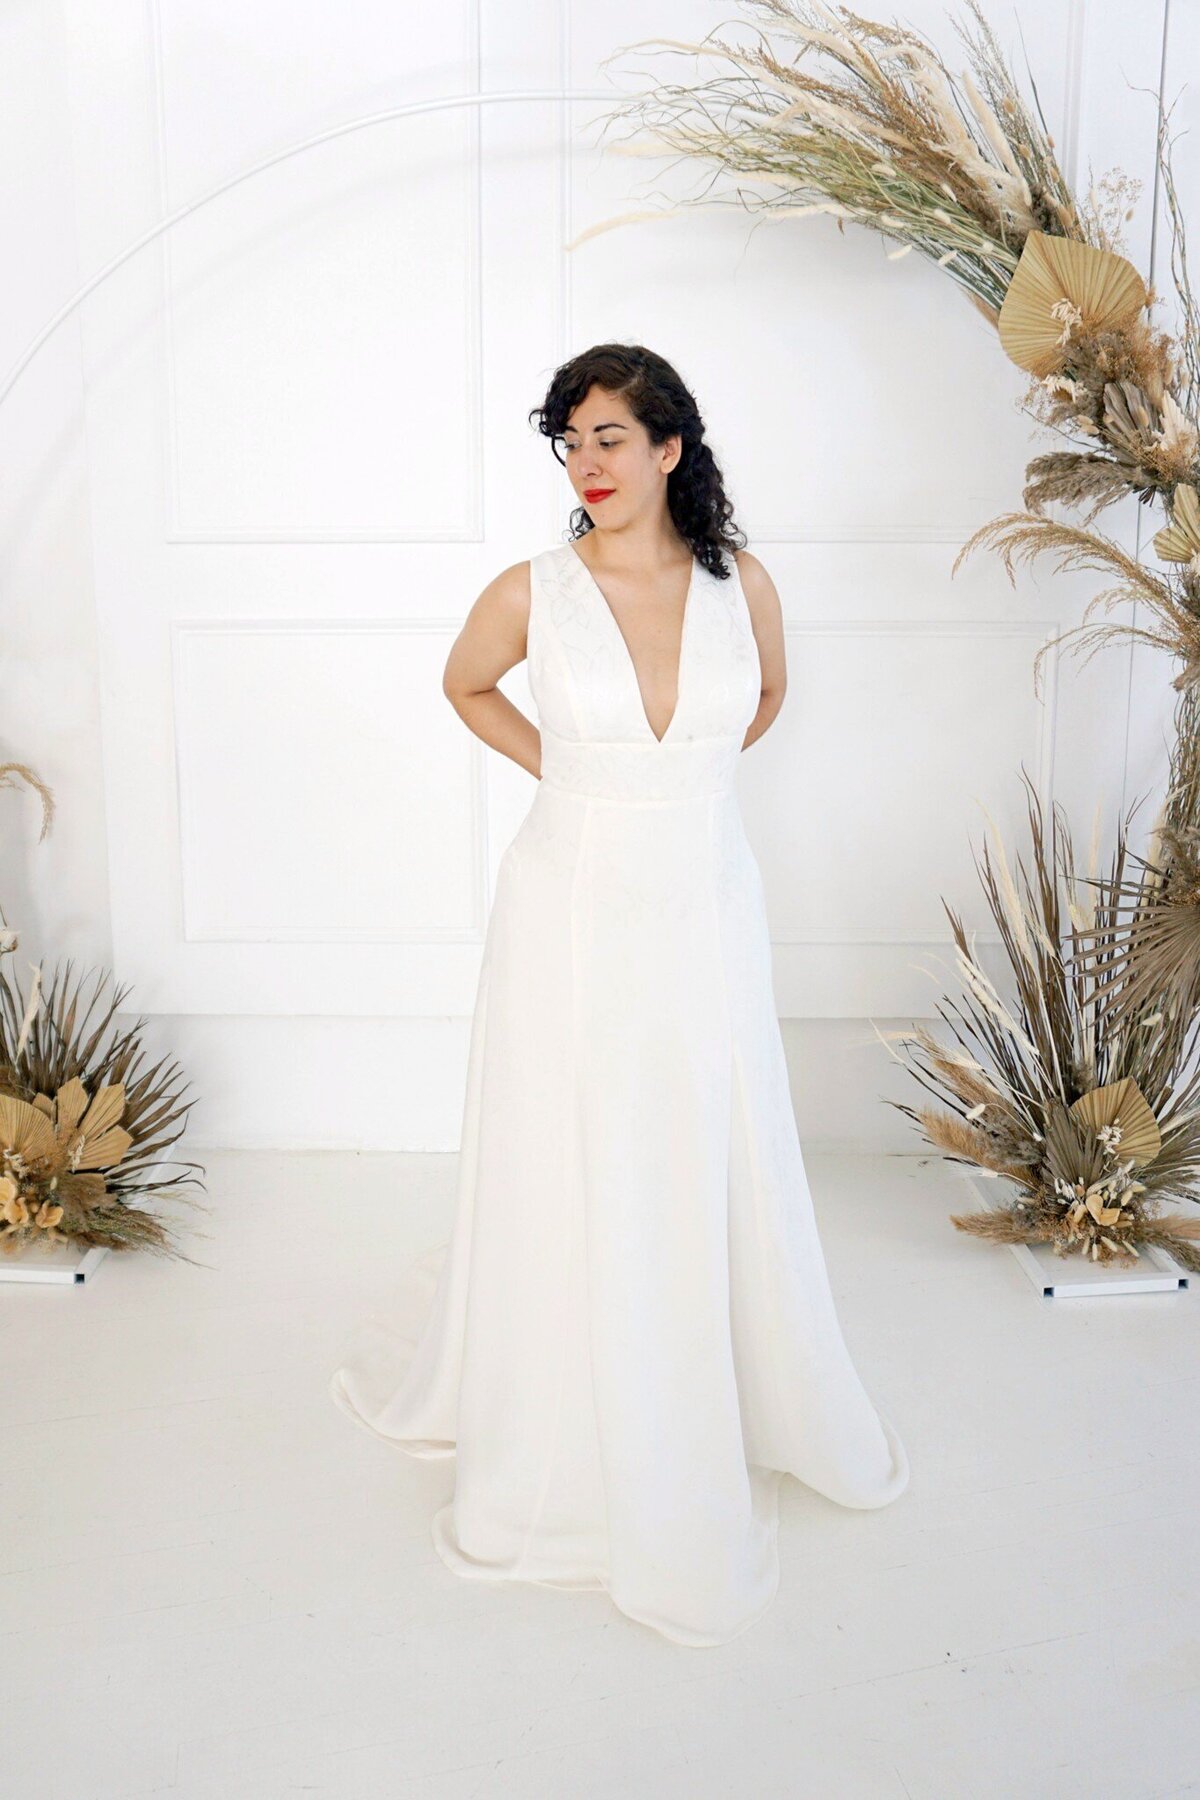 The Sol wedding dress style showcases the modified a-line skirt and v-neck bodice. It is made in a floral jacquard crepe.